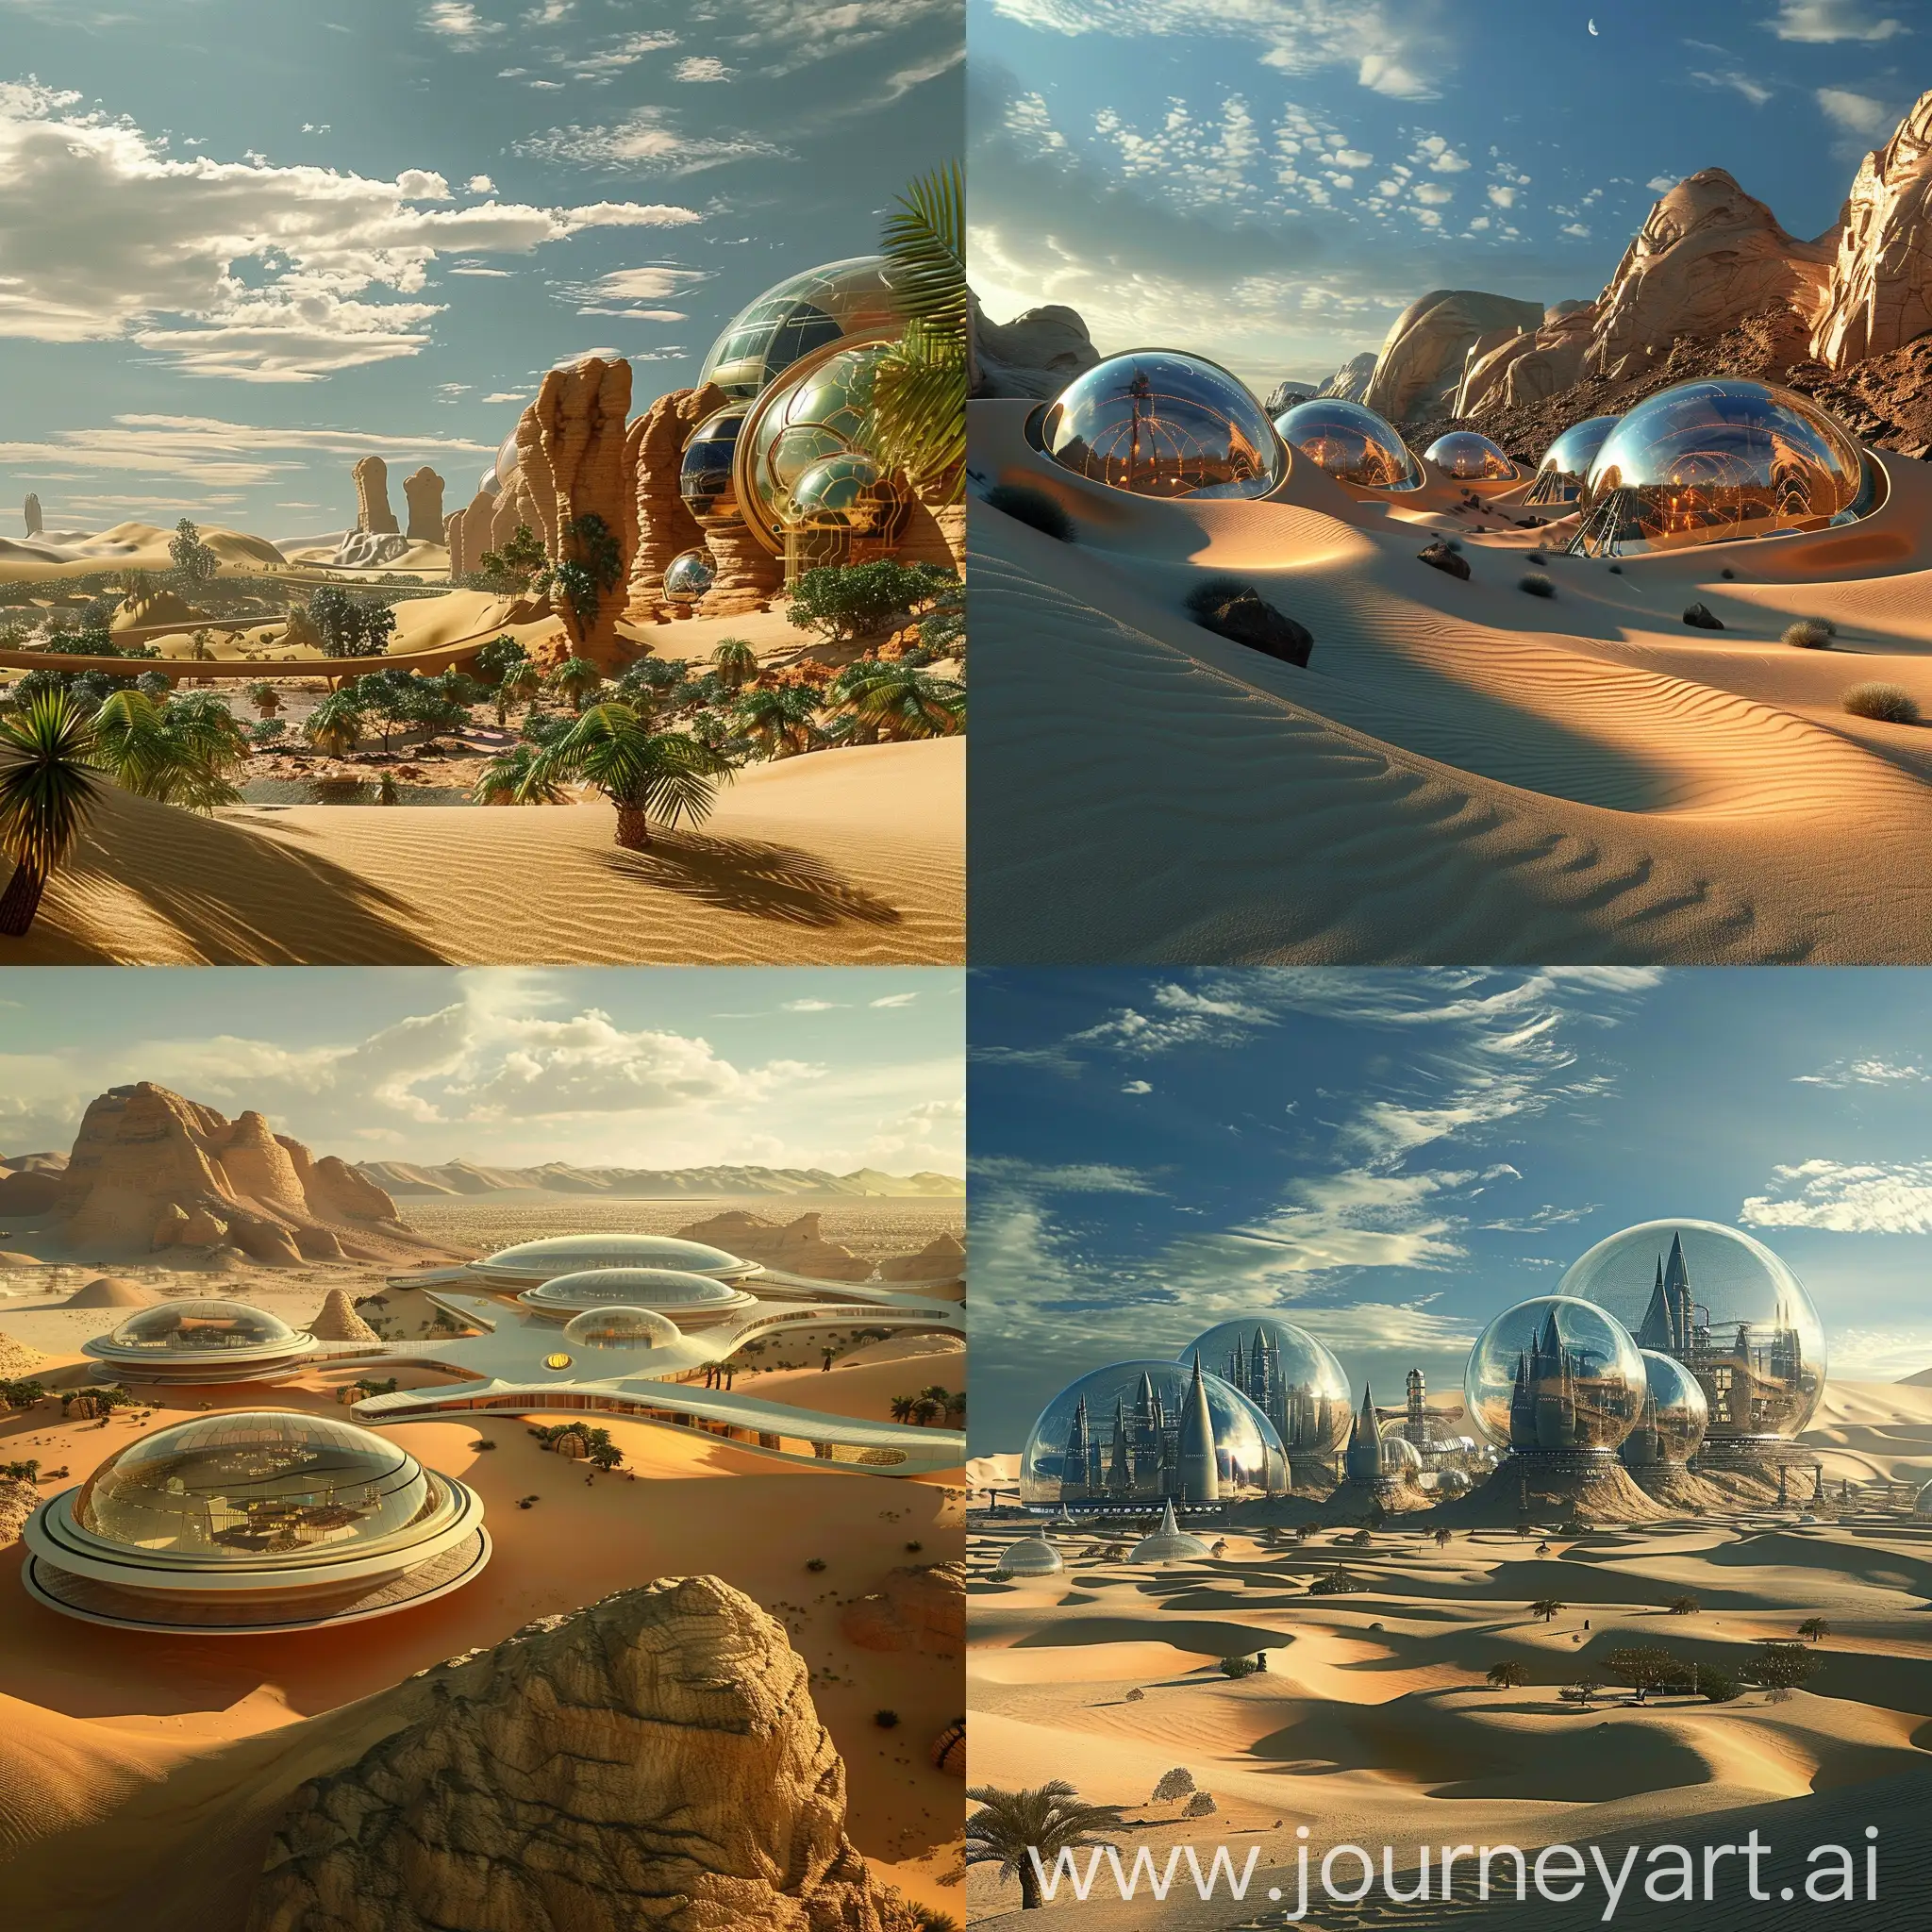 Futuristic-SciFi-Desert-with-SolarPowered-Climate-Domes-and-Holographic-Mirage-Entertainment